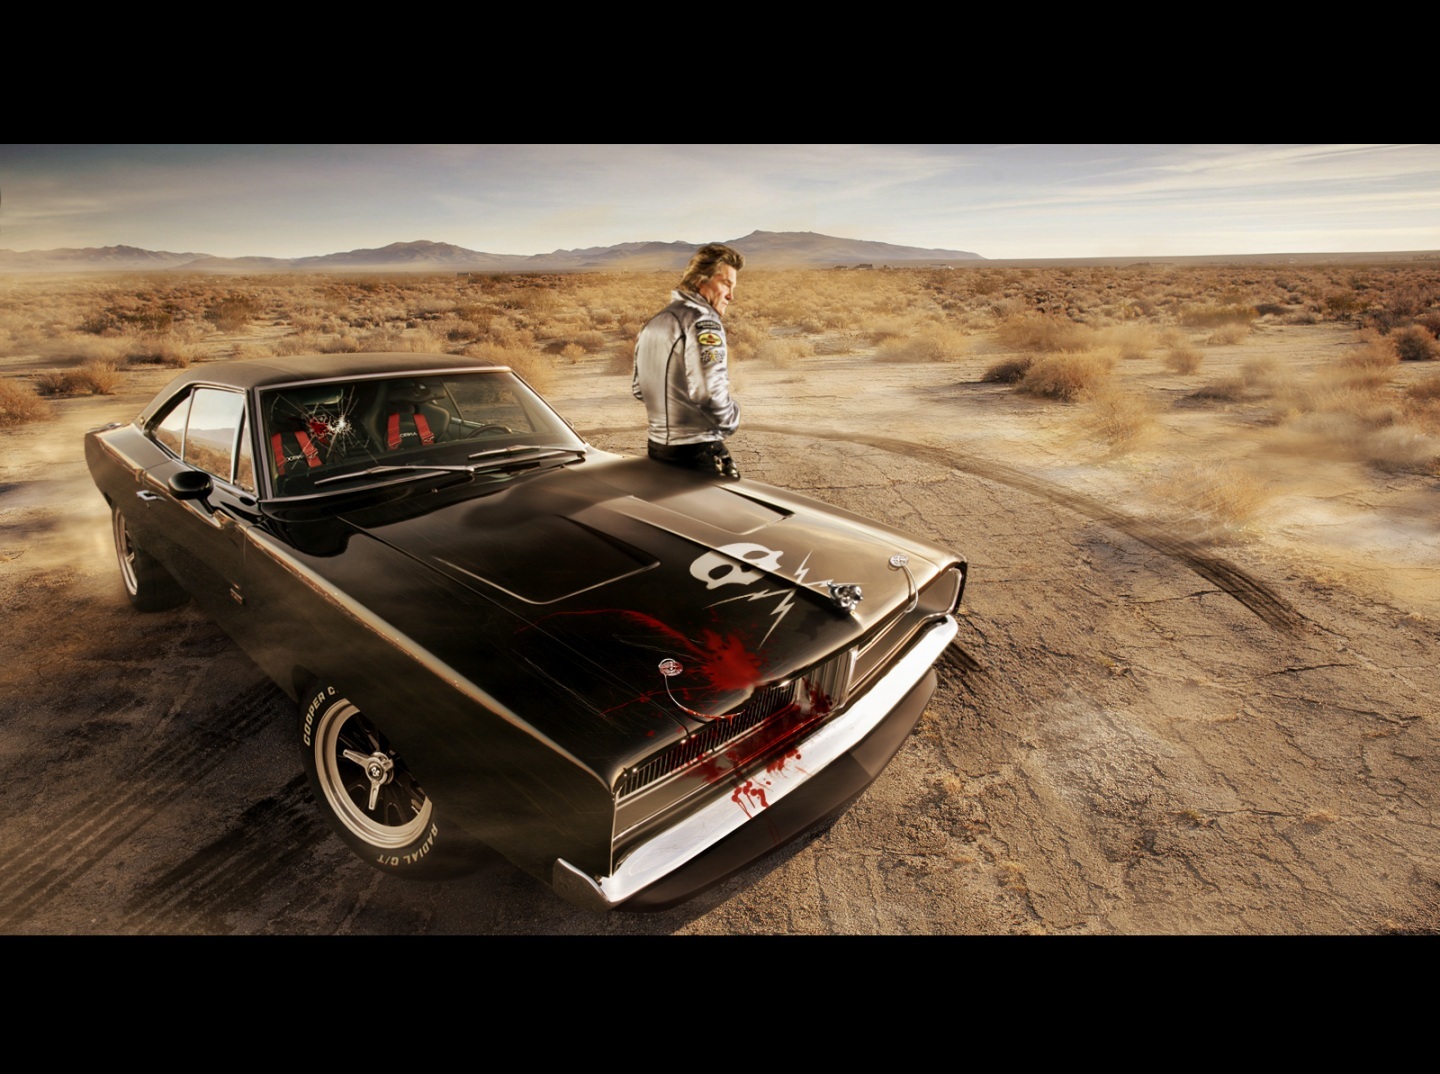 Death Proof #10